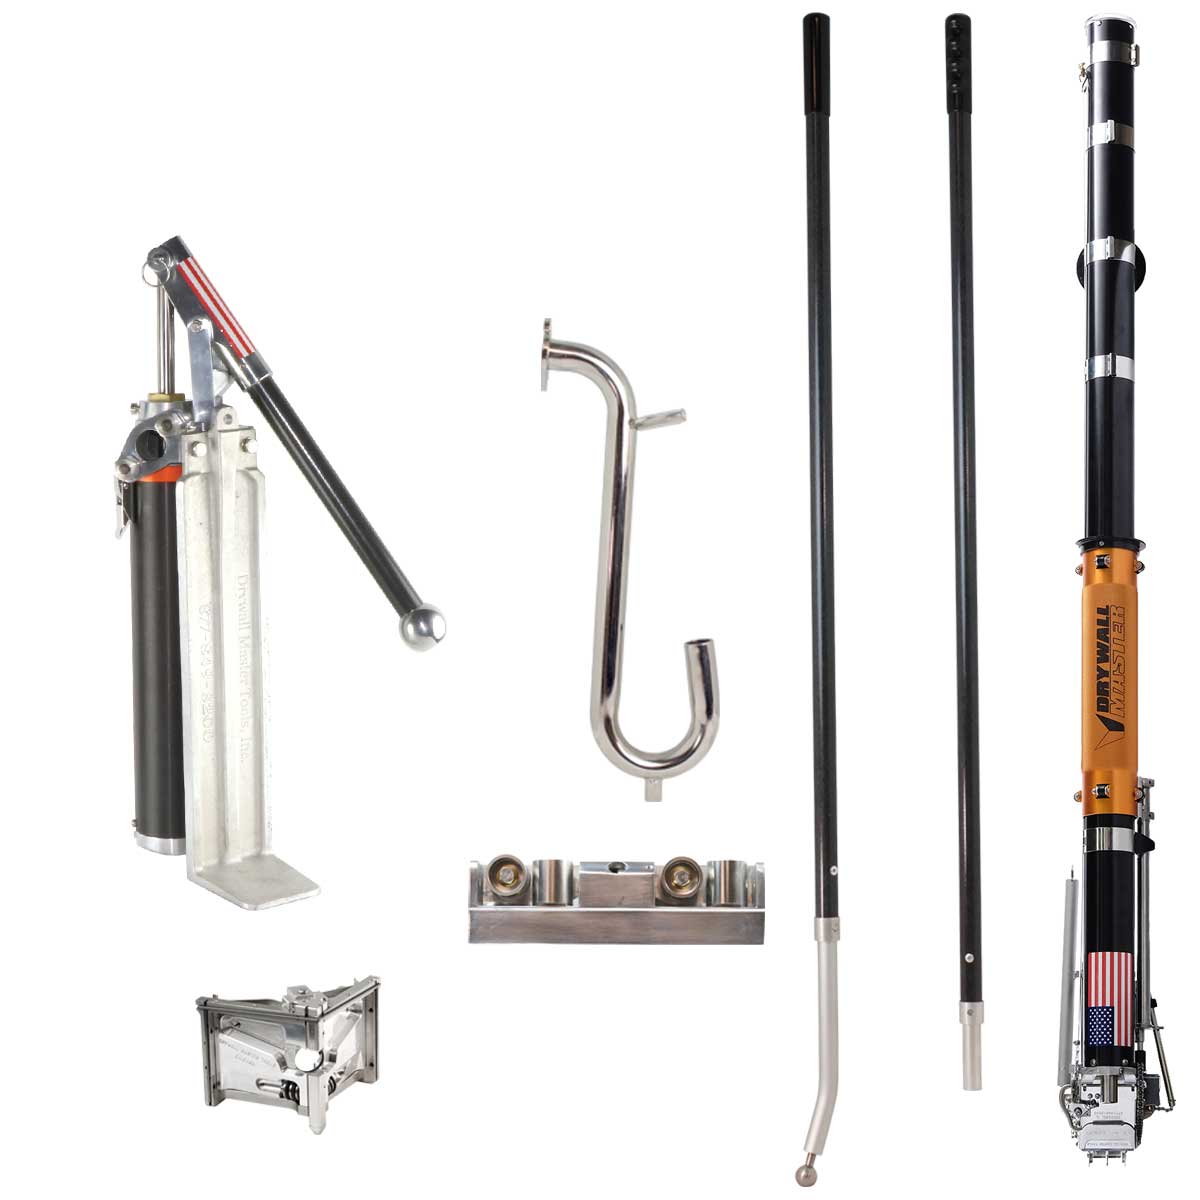 TapeTech Platinum Mixed Full Set Of Automatic Drywall Tools